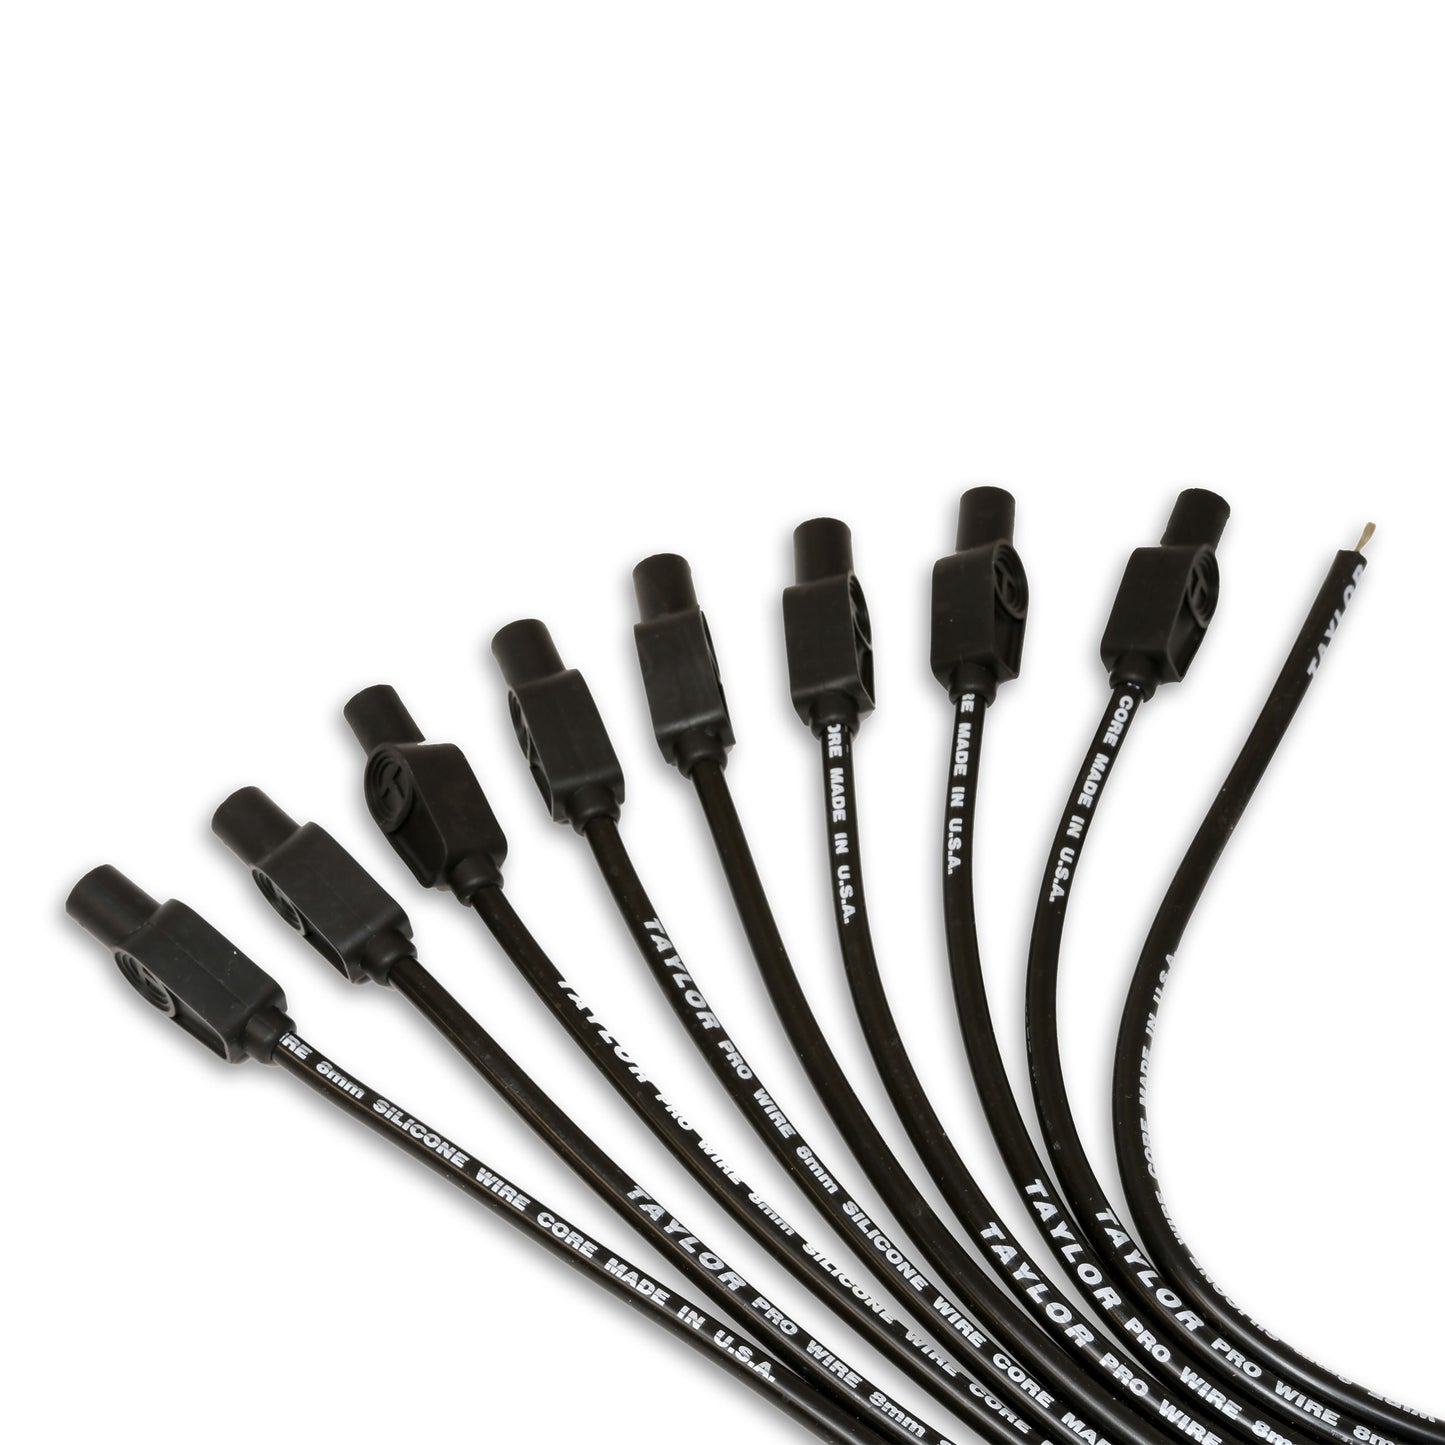 Taylor Cable 70054 8mm Pro TCW Ignition Wires univ 8 cyl 180 black